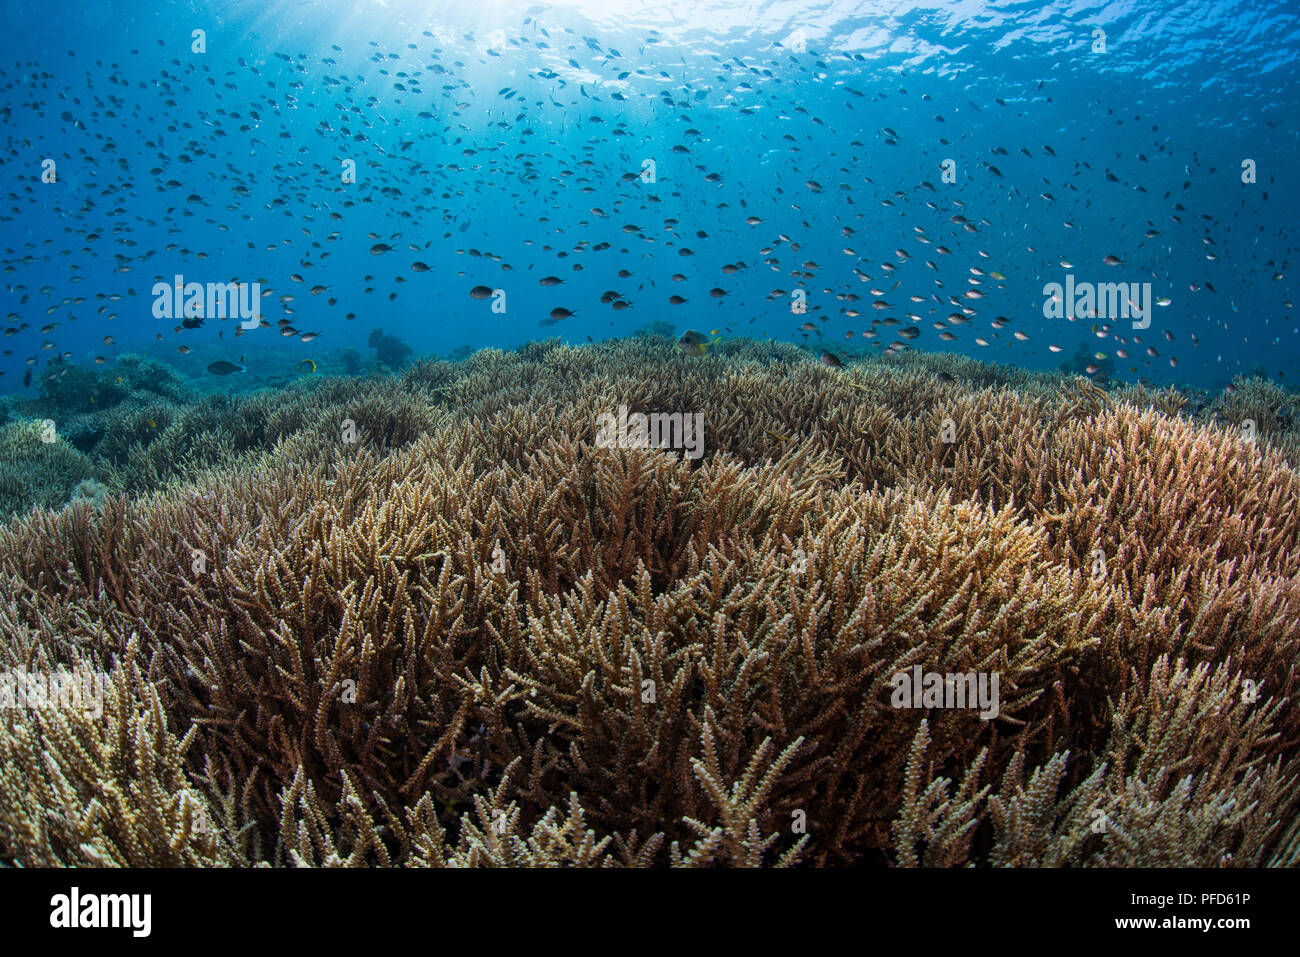 Pristine, shallow coral reef in clear water with many damselfish. Komodo National Park, Indonesia Stock Photo